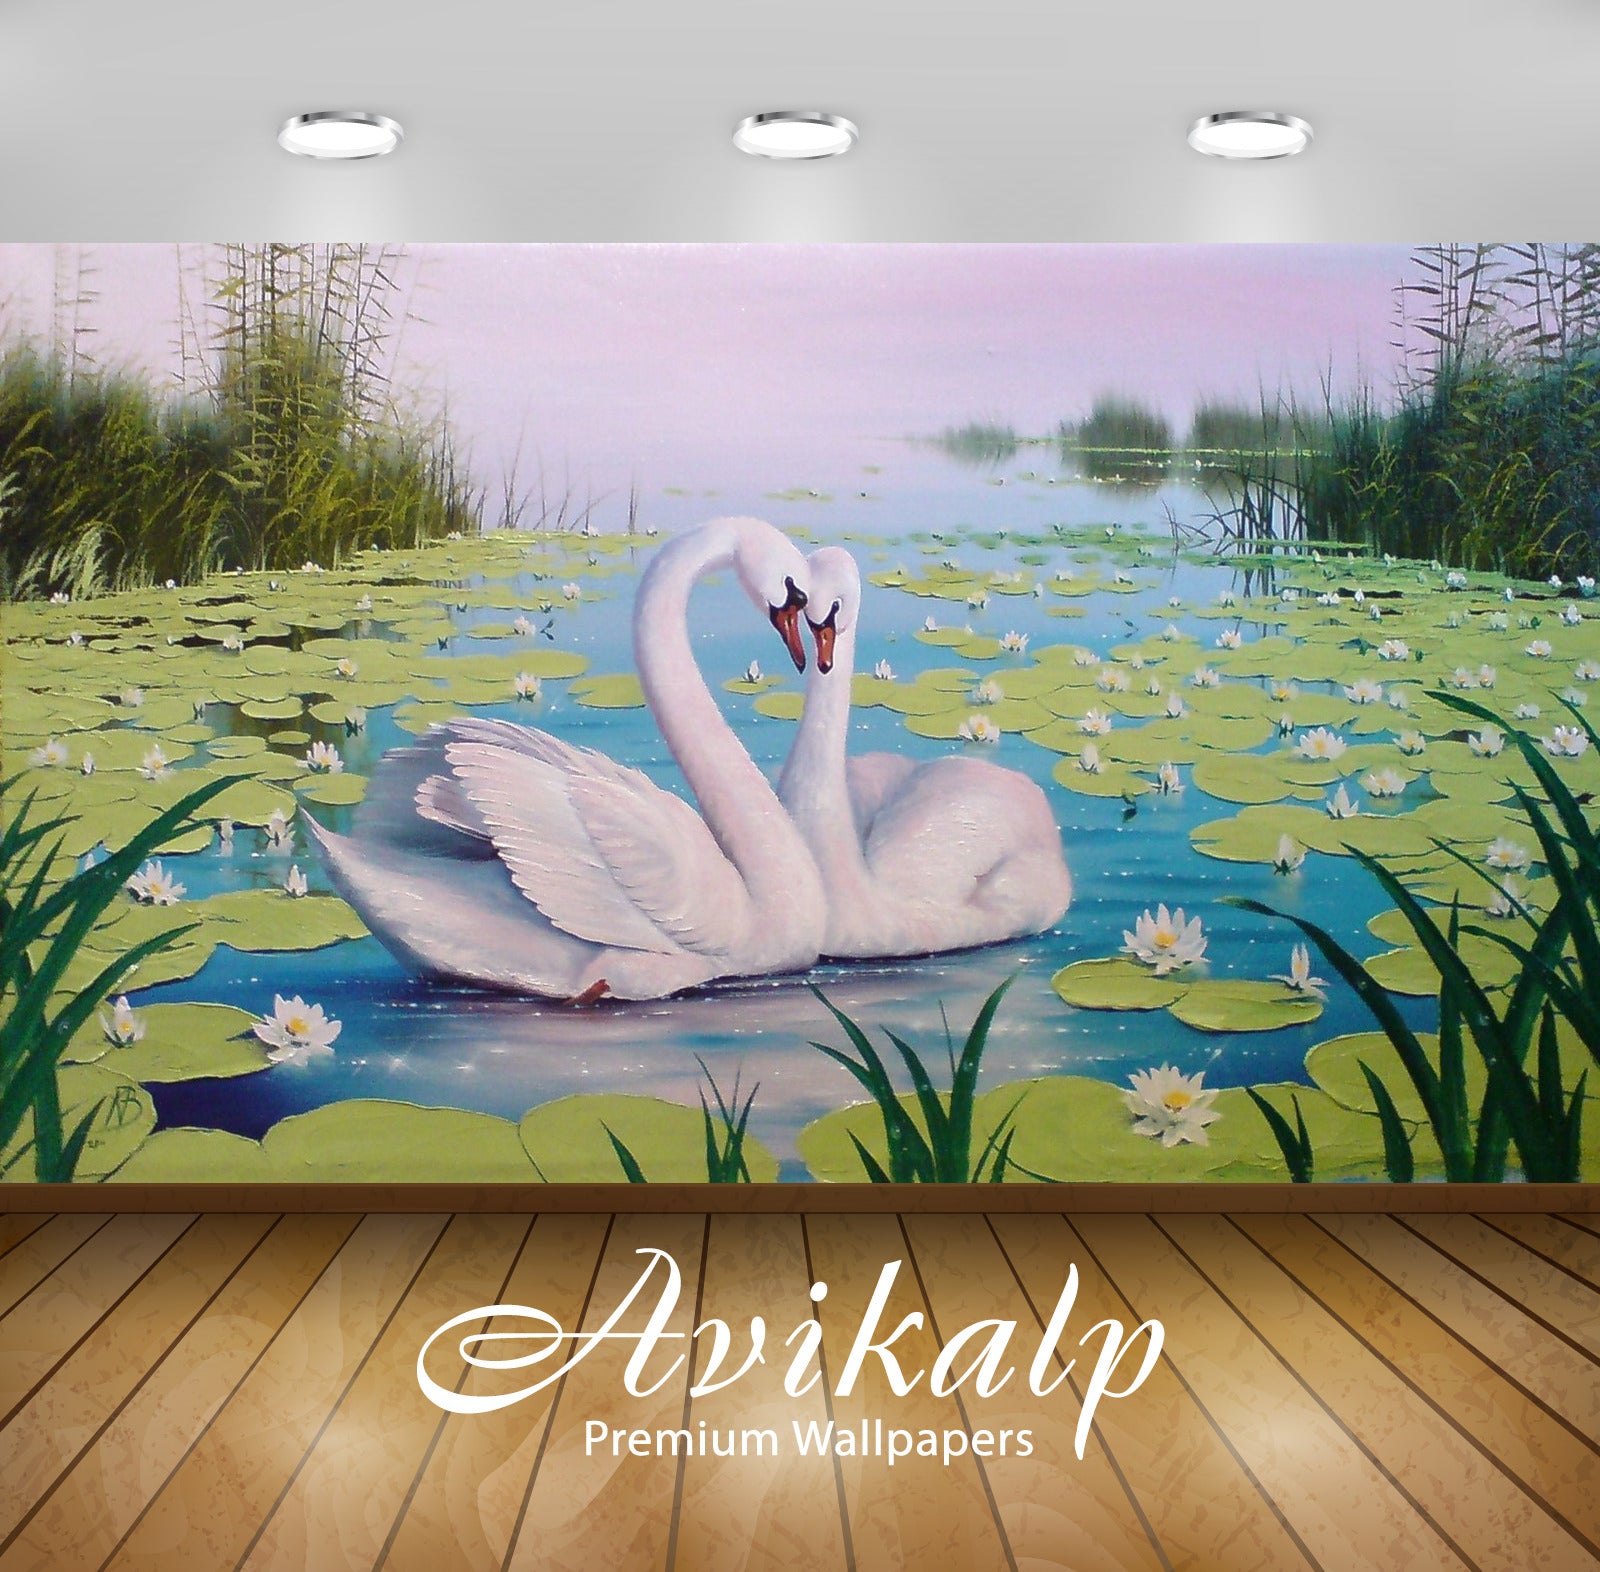 Avikalp Exclusive Awi2242 Swan lake color lotus reeds Full HD Wallpapers for Living room, Hall, Kids